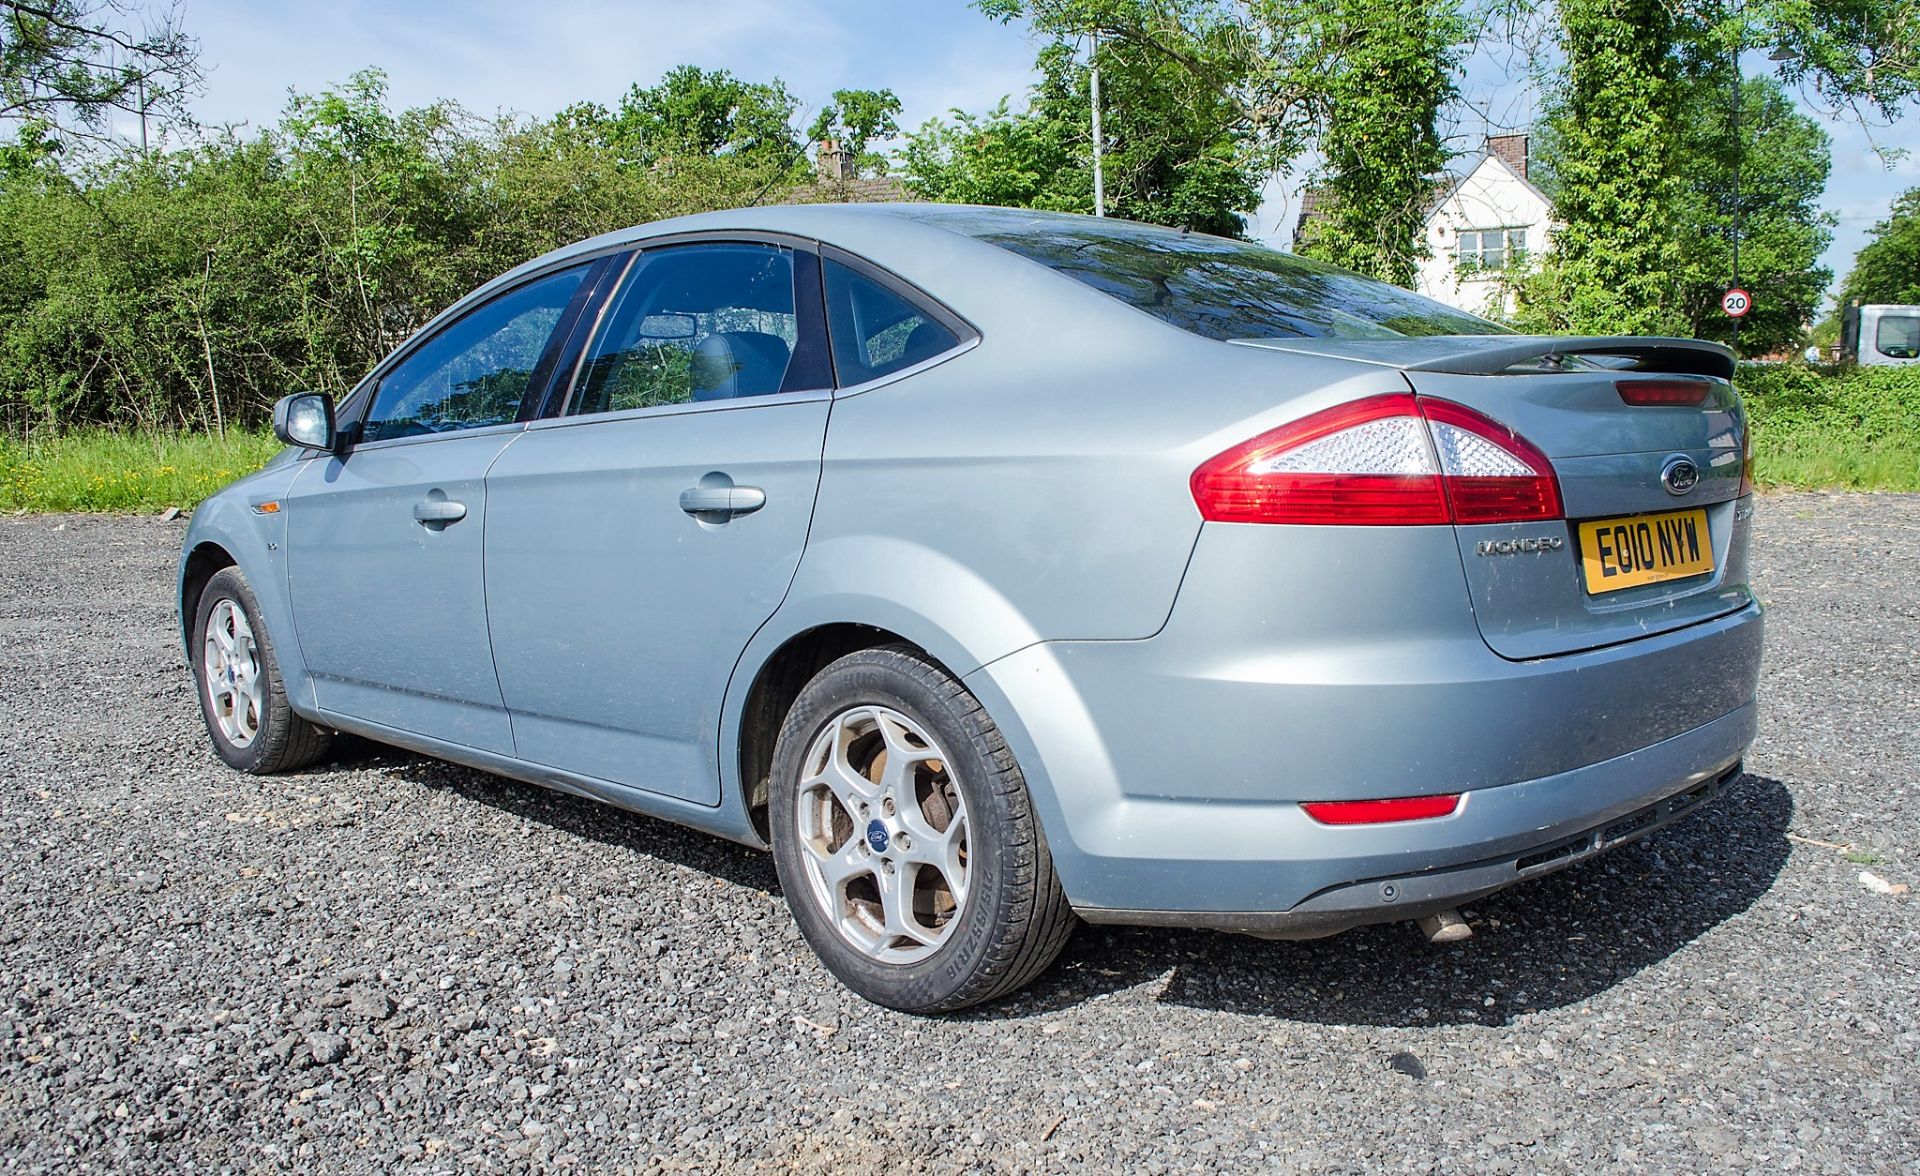 Ford Mondeo 2.0 TDCi Titanium 5 door saloon car Registration Number: EO10 NYW Date of - Image 3 of 29